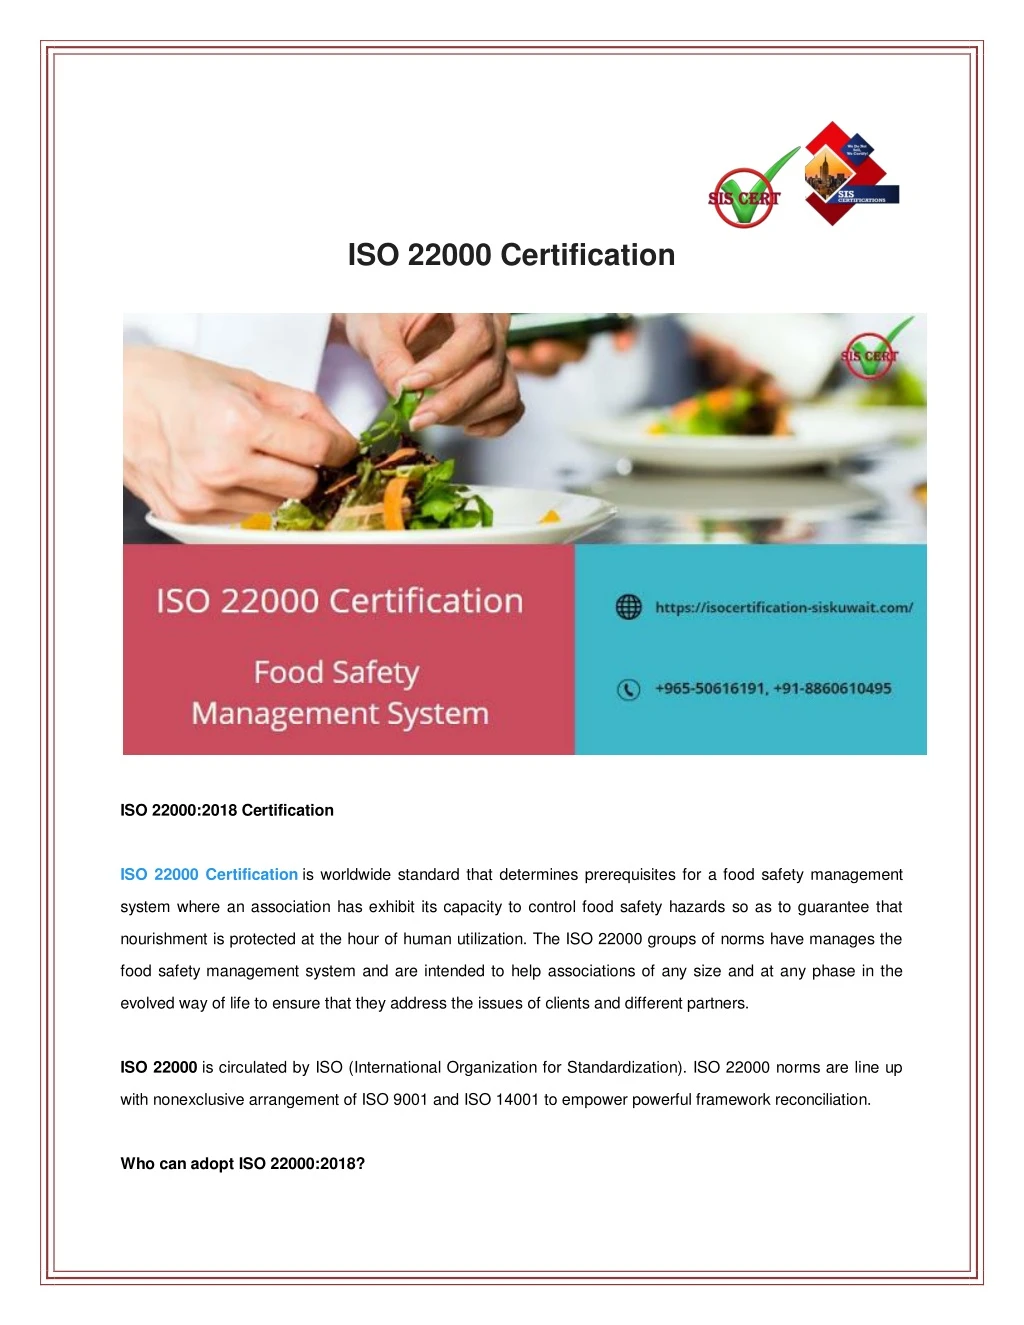 iso 22000 certification